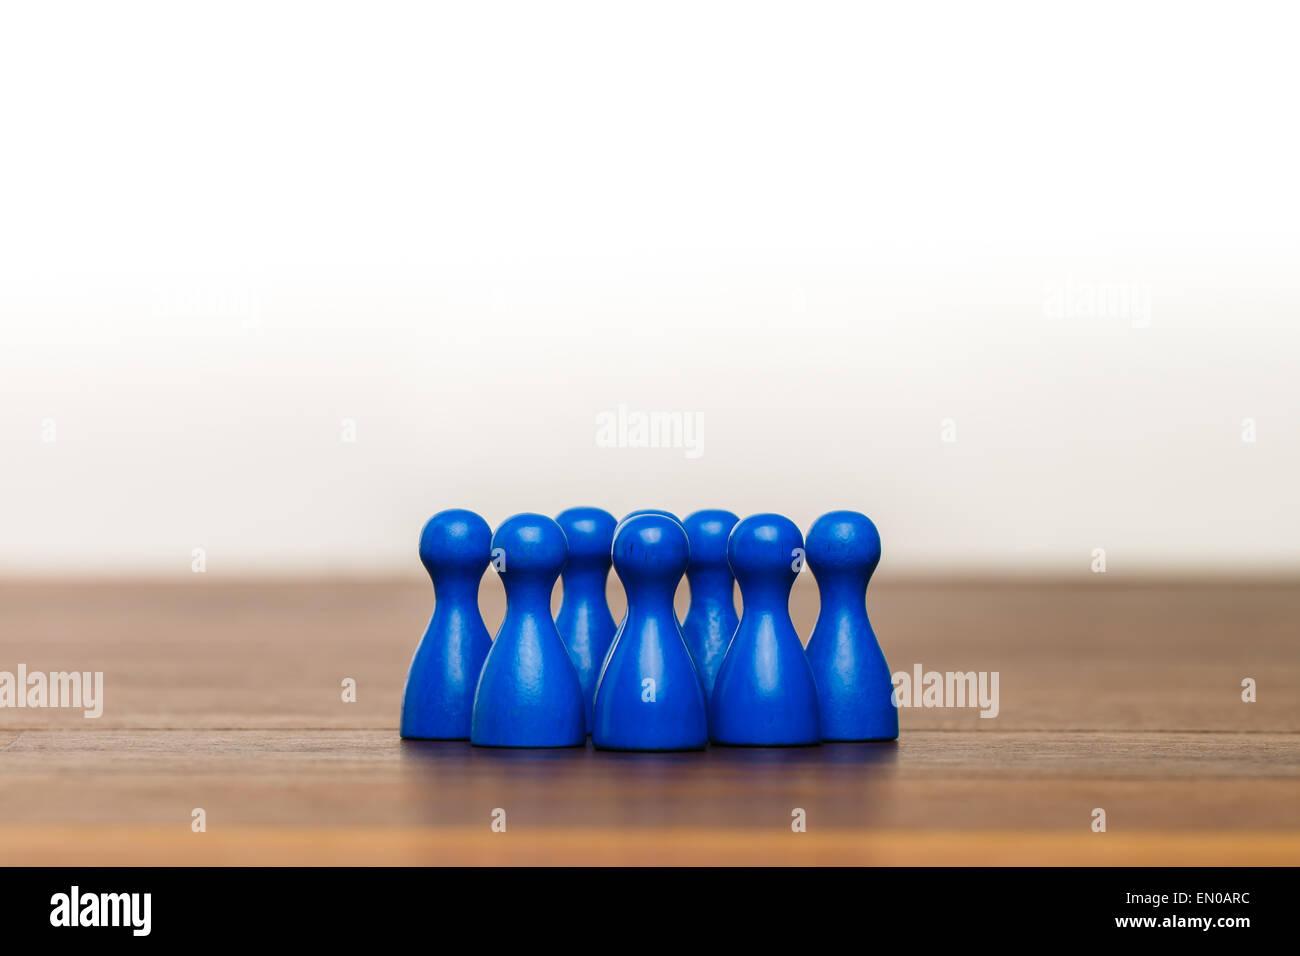 Concept for: team, group,  friends, working together. With blue pawn figures and white background on wooden surface. Stock Photo